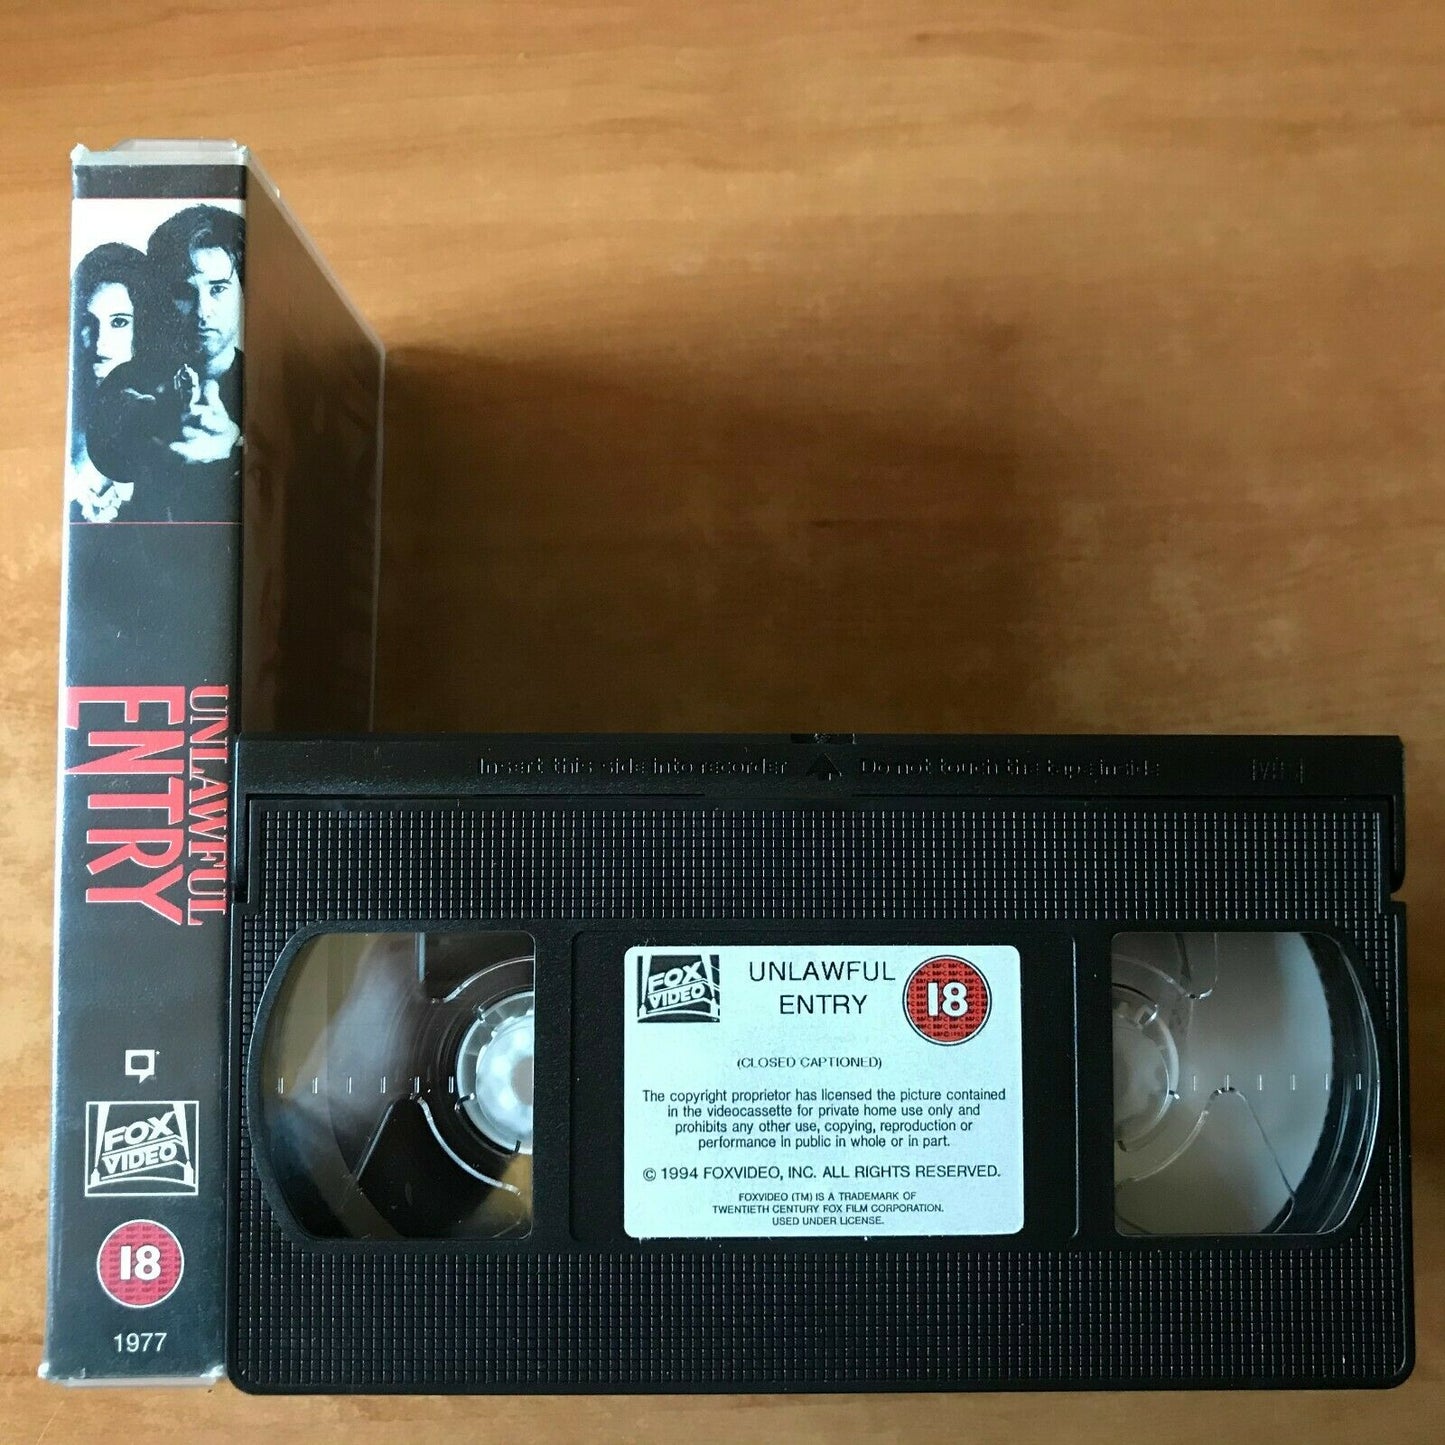 Unlawful Entry: Police Action - Crime Drama - Kurt Russell / Ray Liotta - VHS-